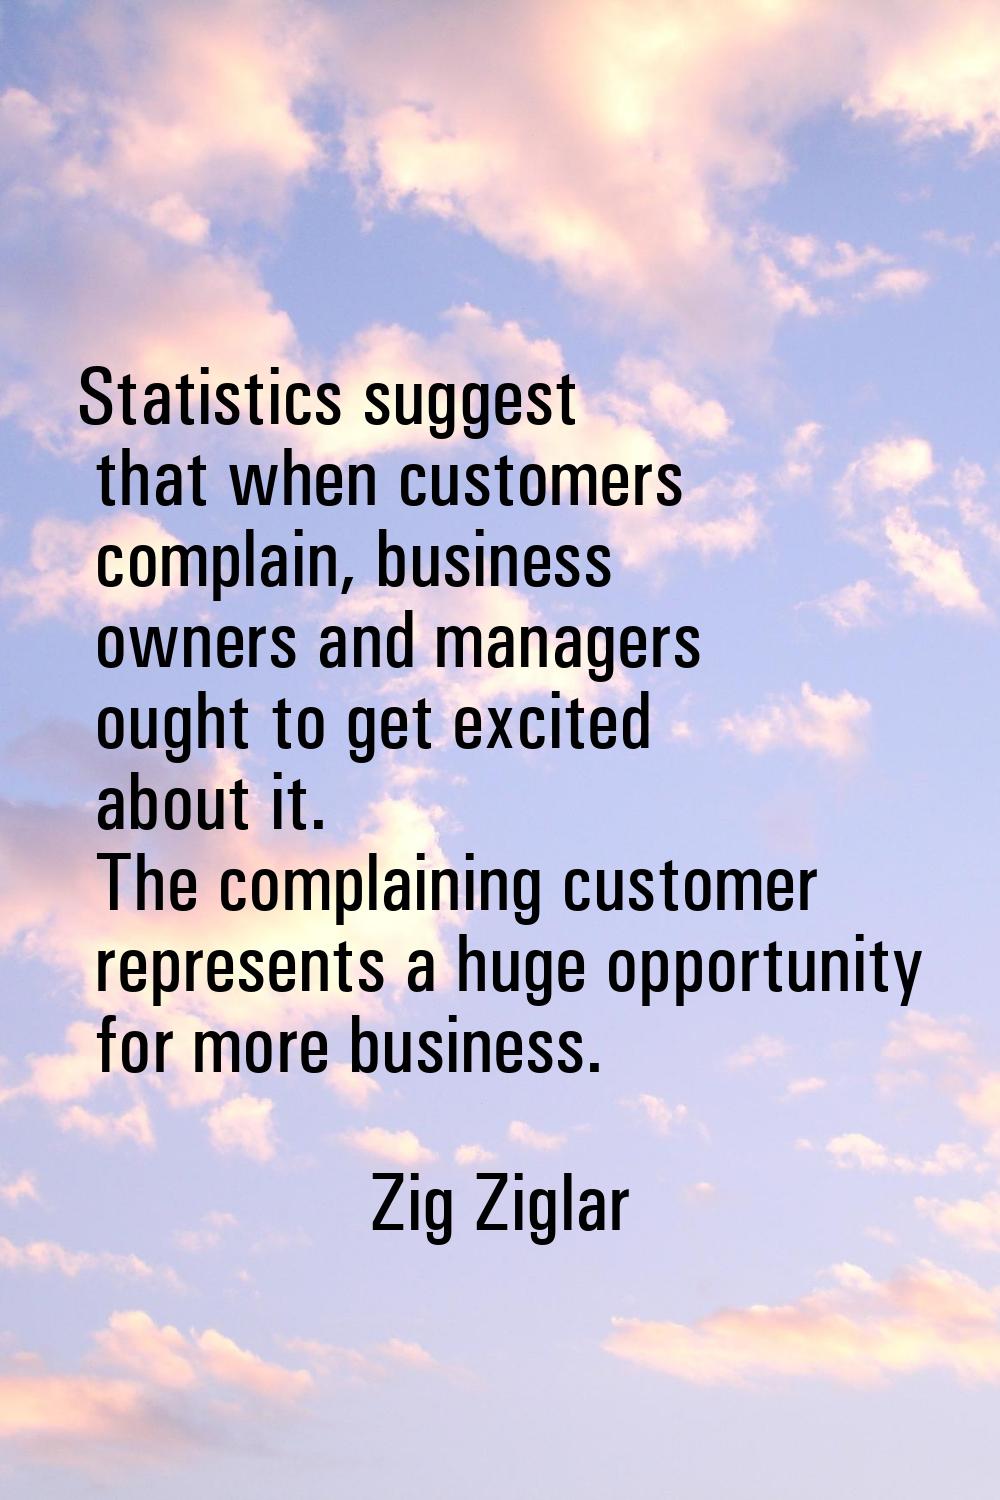 Statistics suggest that when customers complain, business owners and managers ought to get excited 